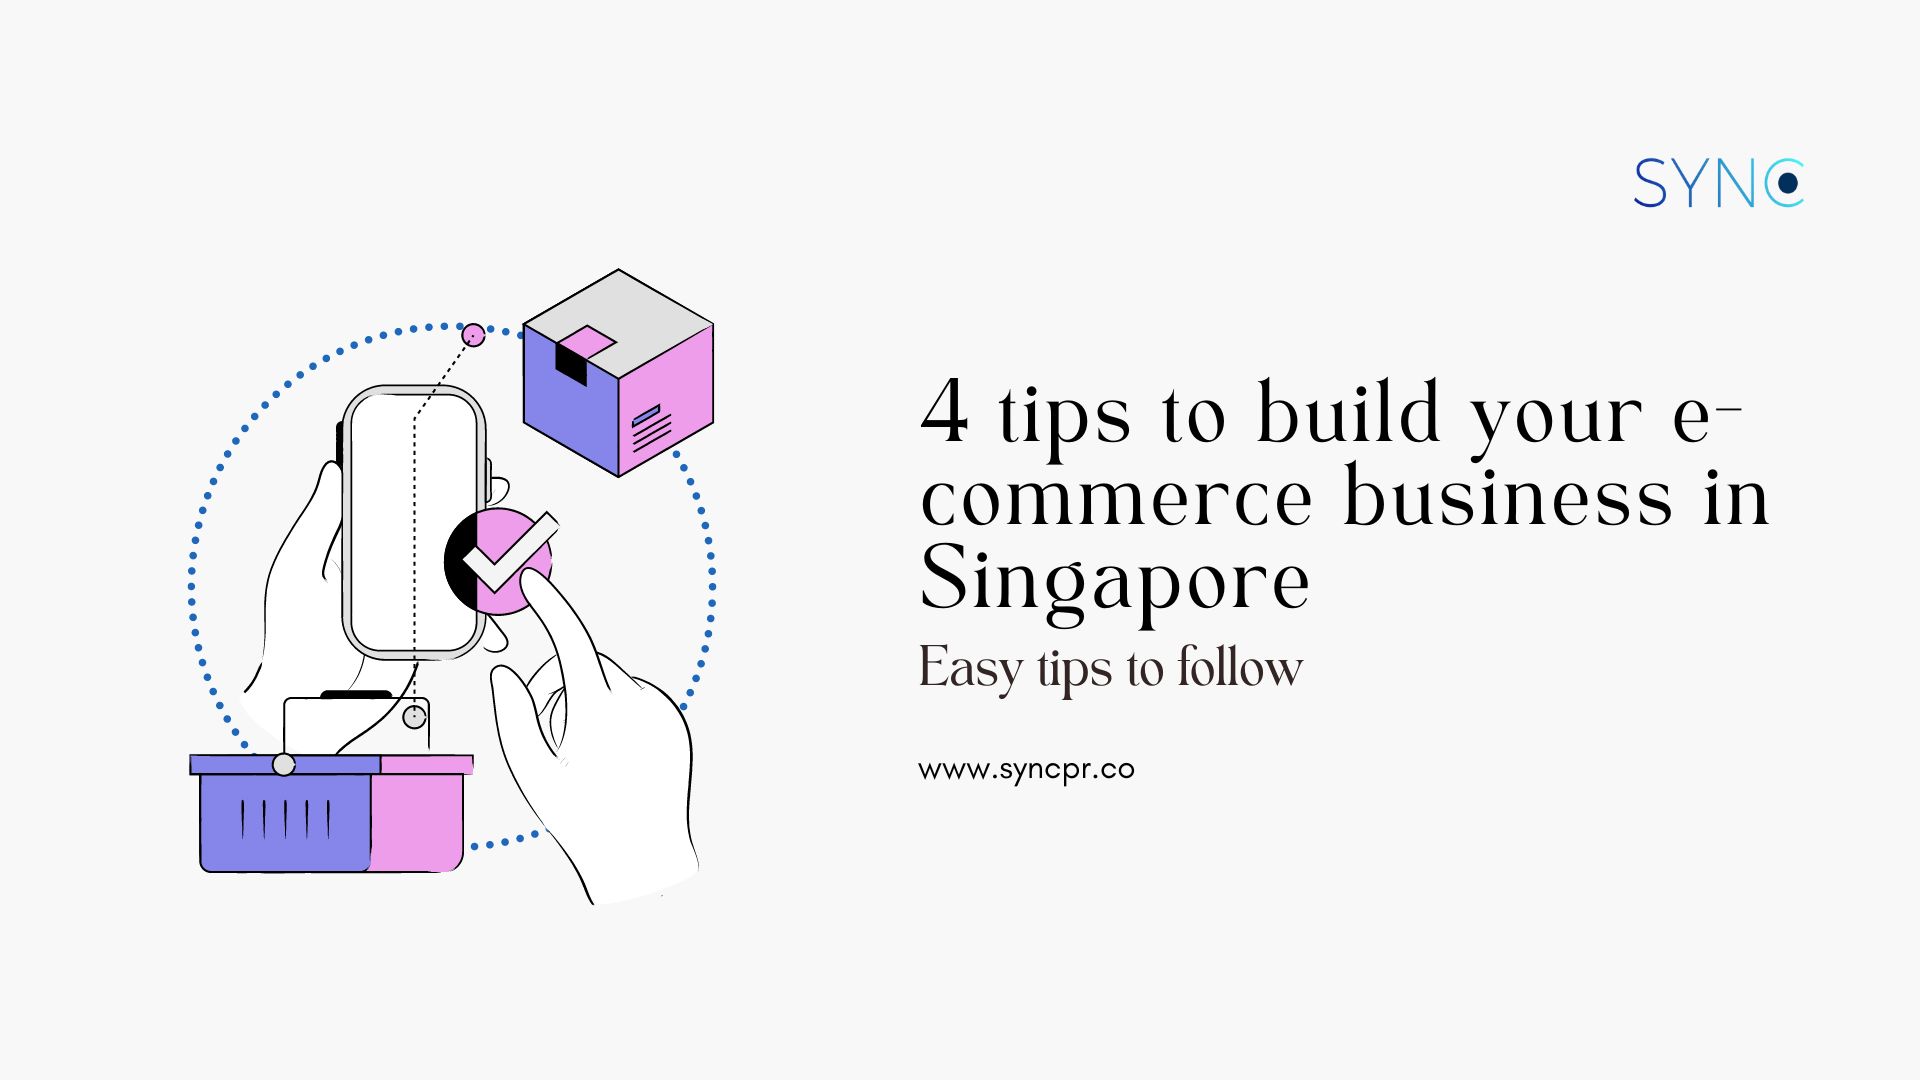 4 tips to build your e-commerce business in Singapore